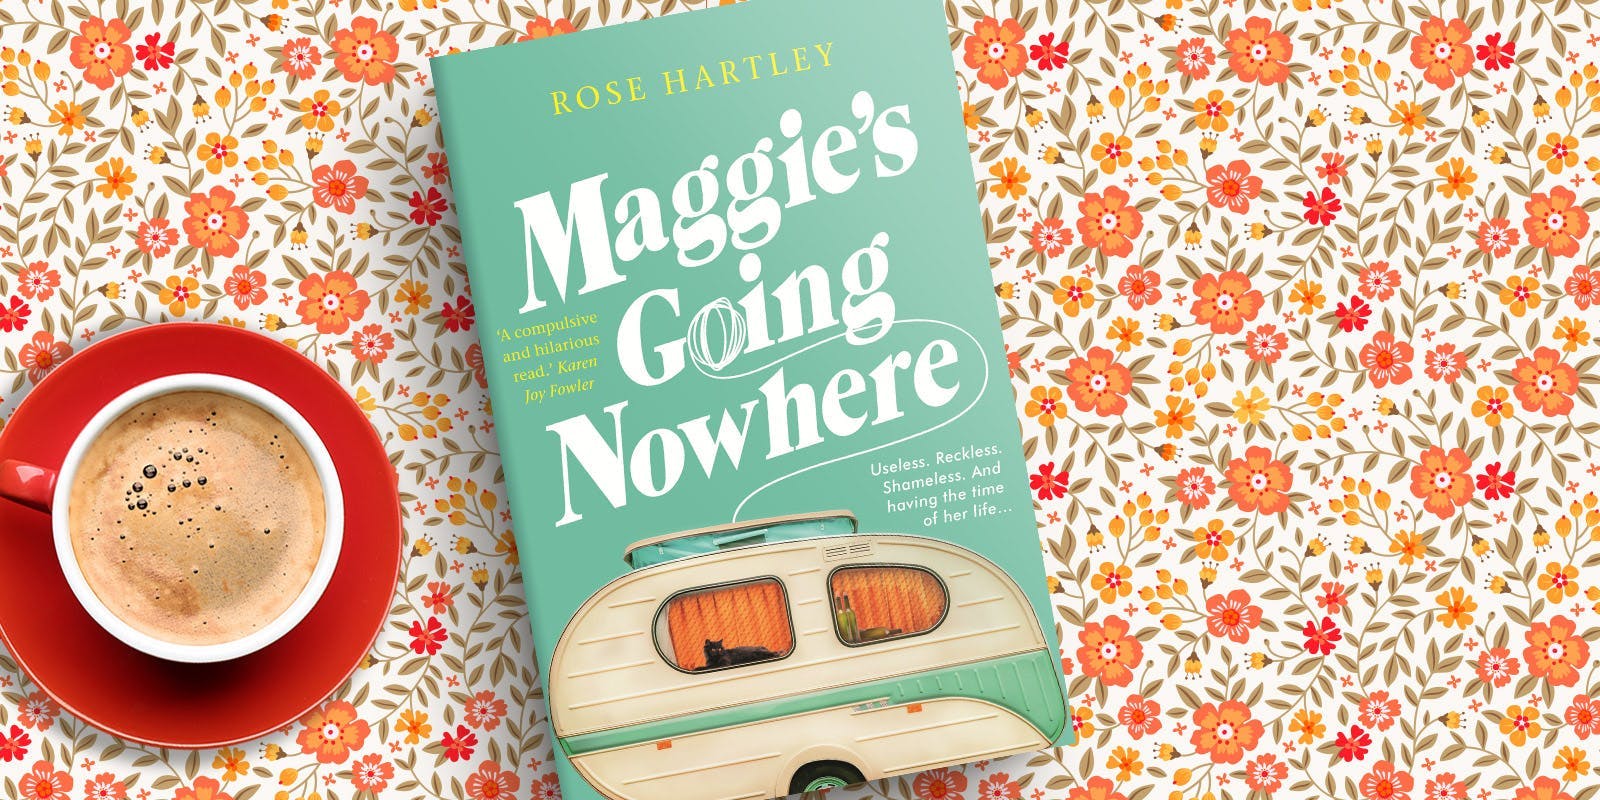 Maggie’s Going Nowhere book club notes